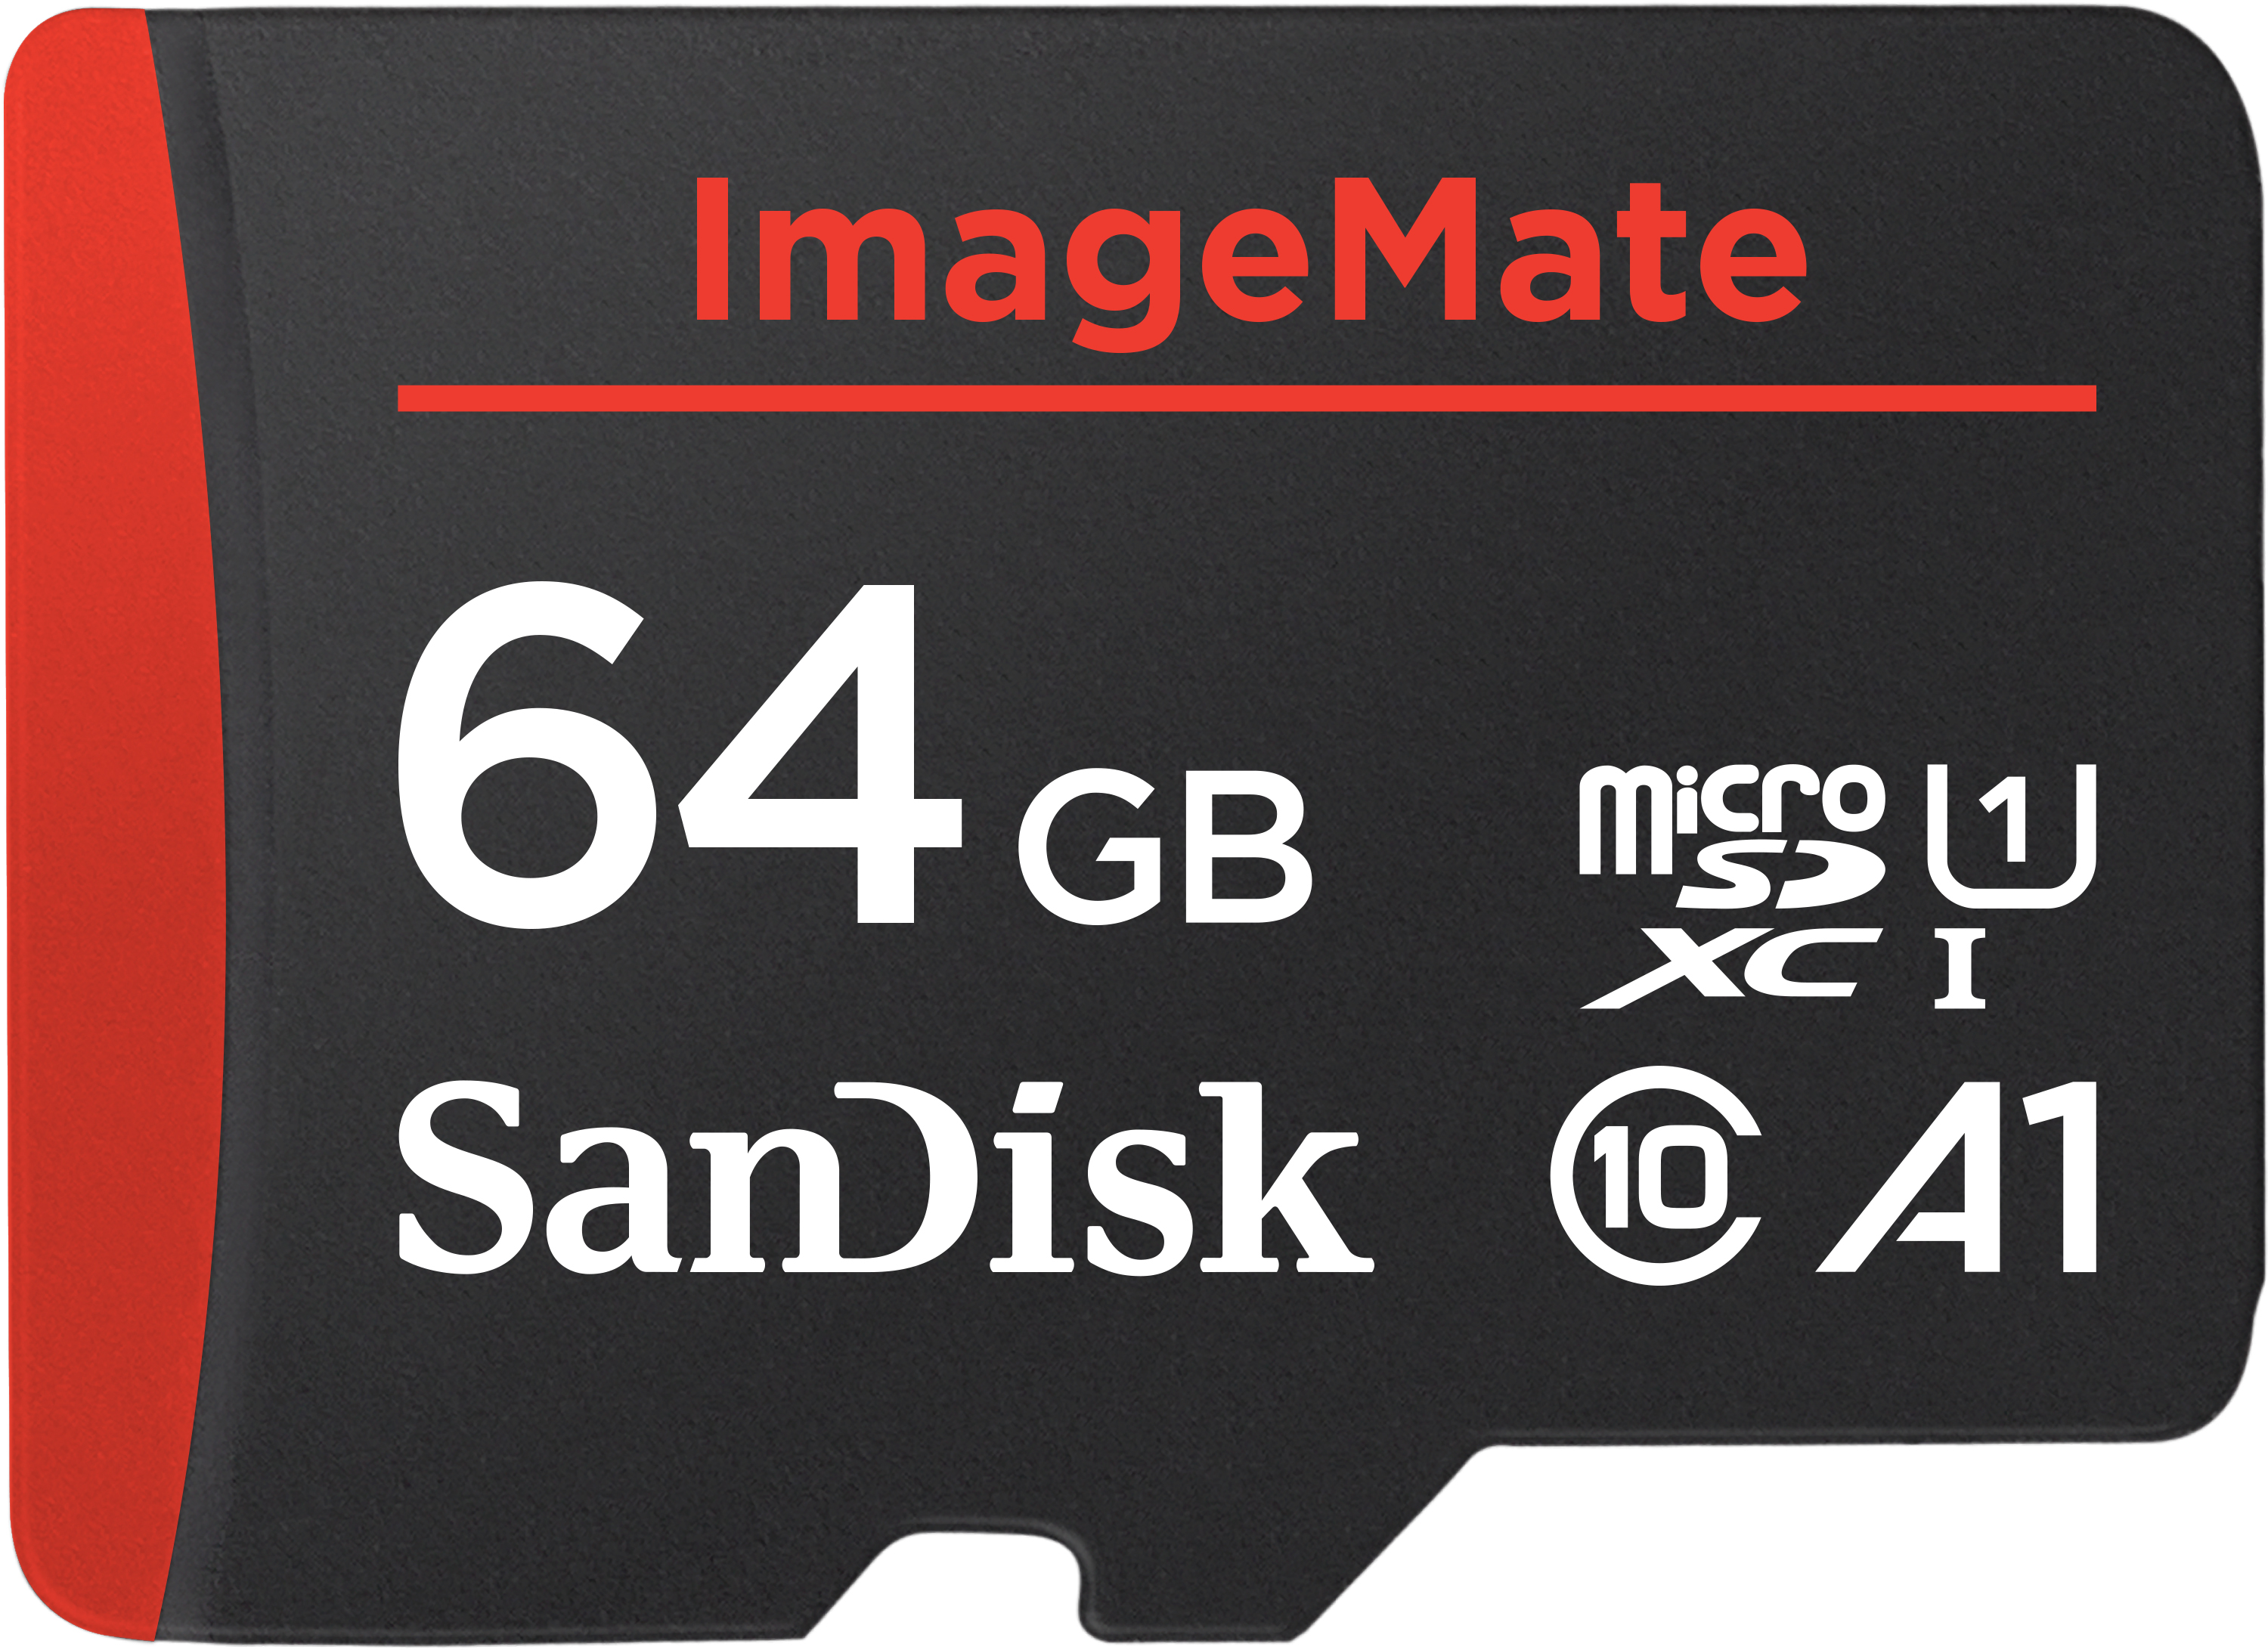 SanDisk 64GB Image Mate MicroSDXC UHS-1 Memory Card with Adapter - C10, U1, Full HD, A1 Micro SD Card - image 1 of 6